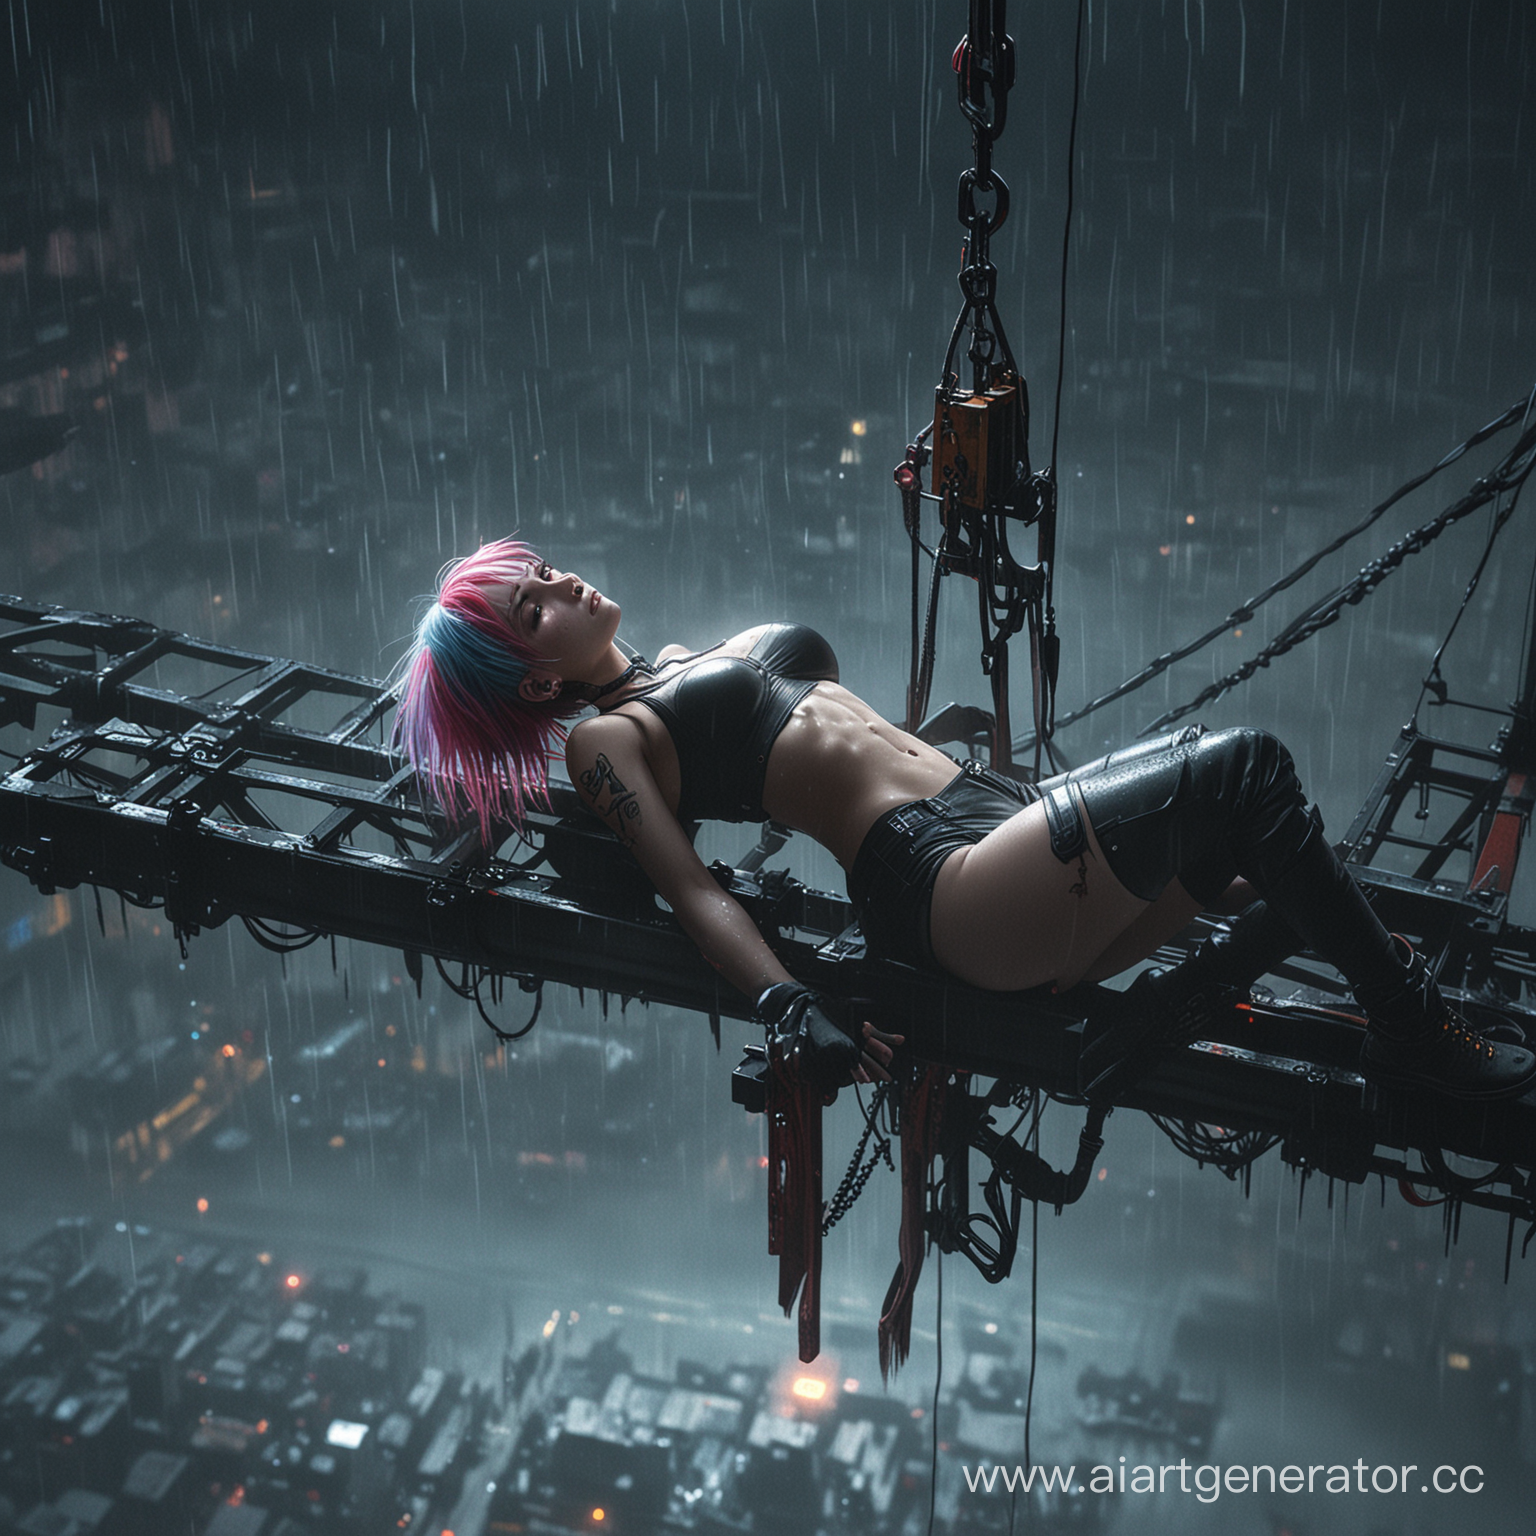 cyberpunk dark style, rain, fog, anime emo girl with detail colored hair, the girl is lying on the edge of the lifting crane, detail light and shadows, dynamic frame and the perspective from above